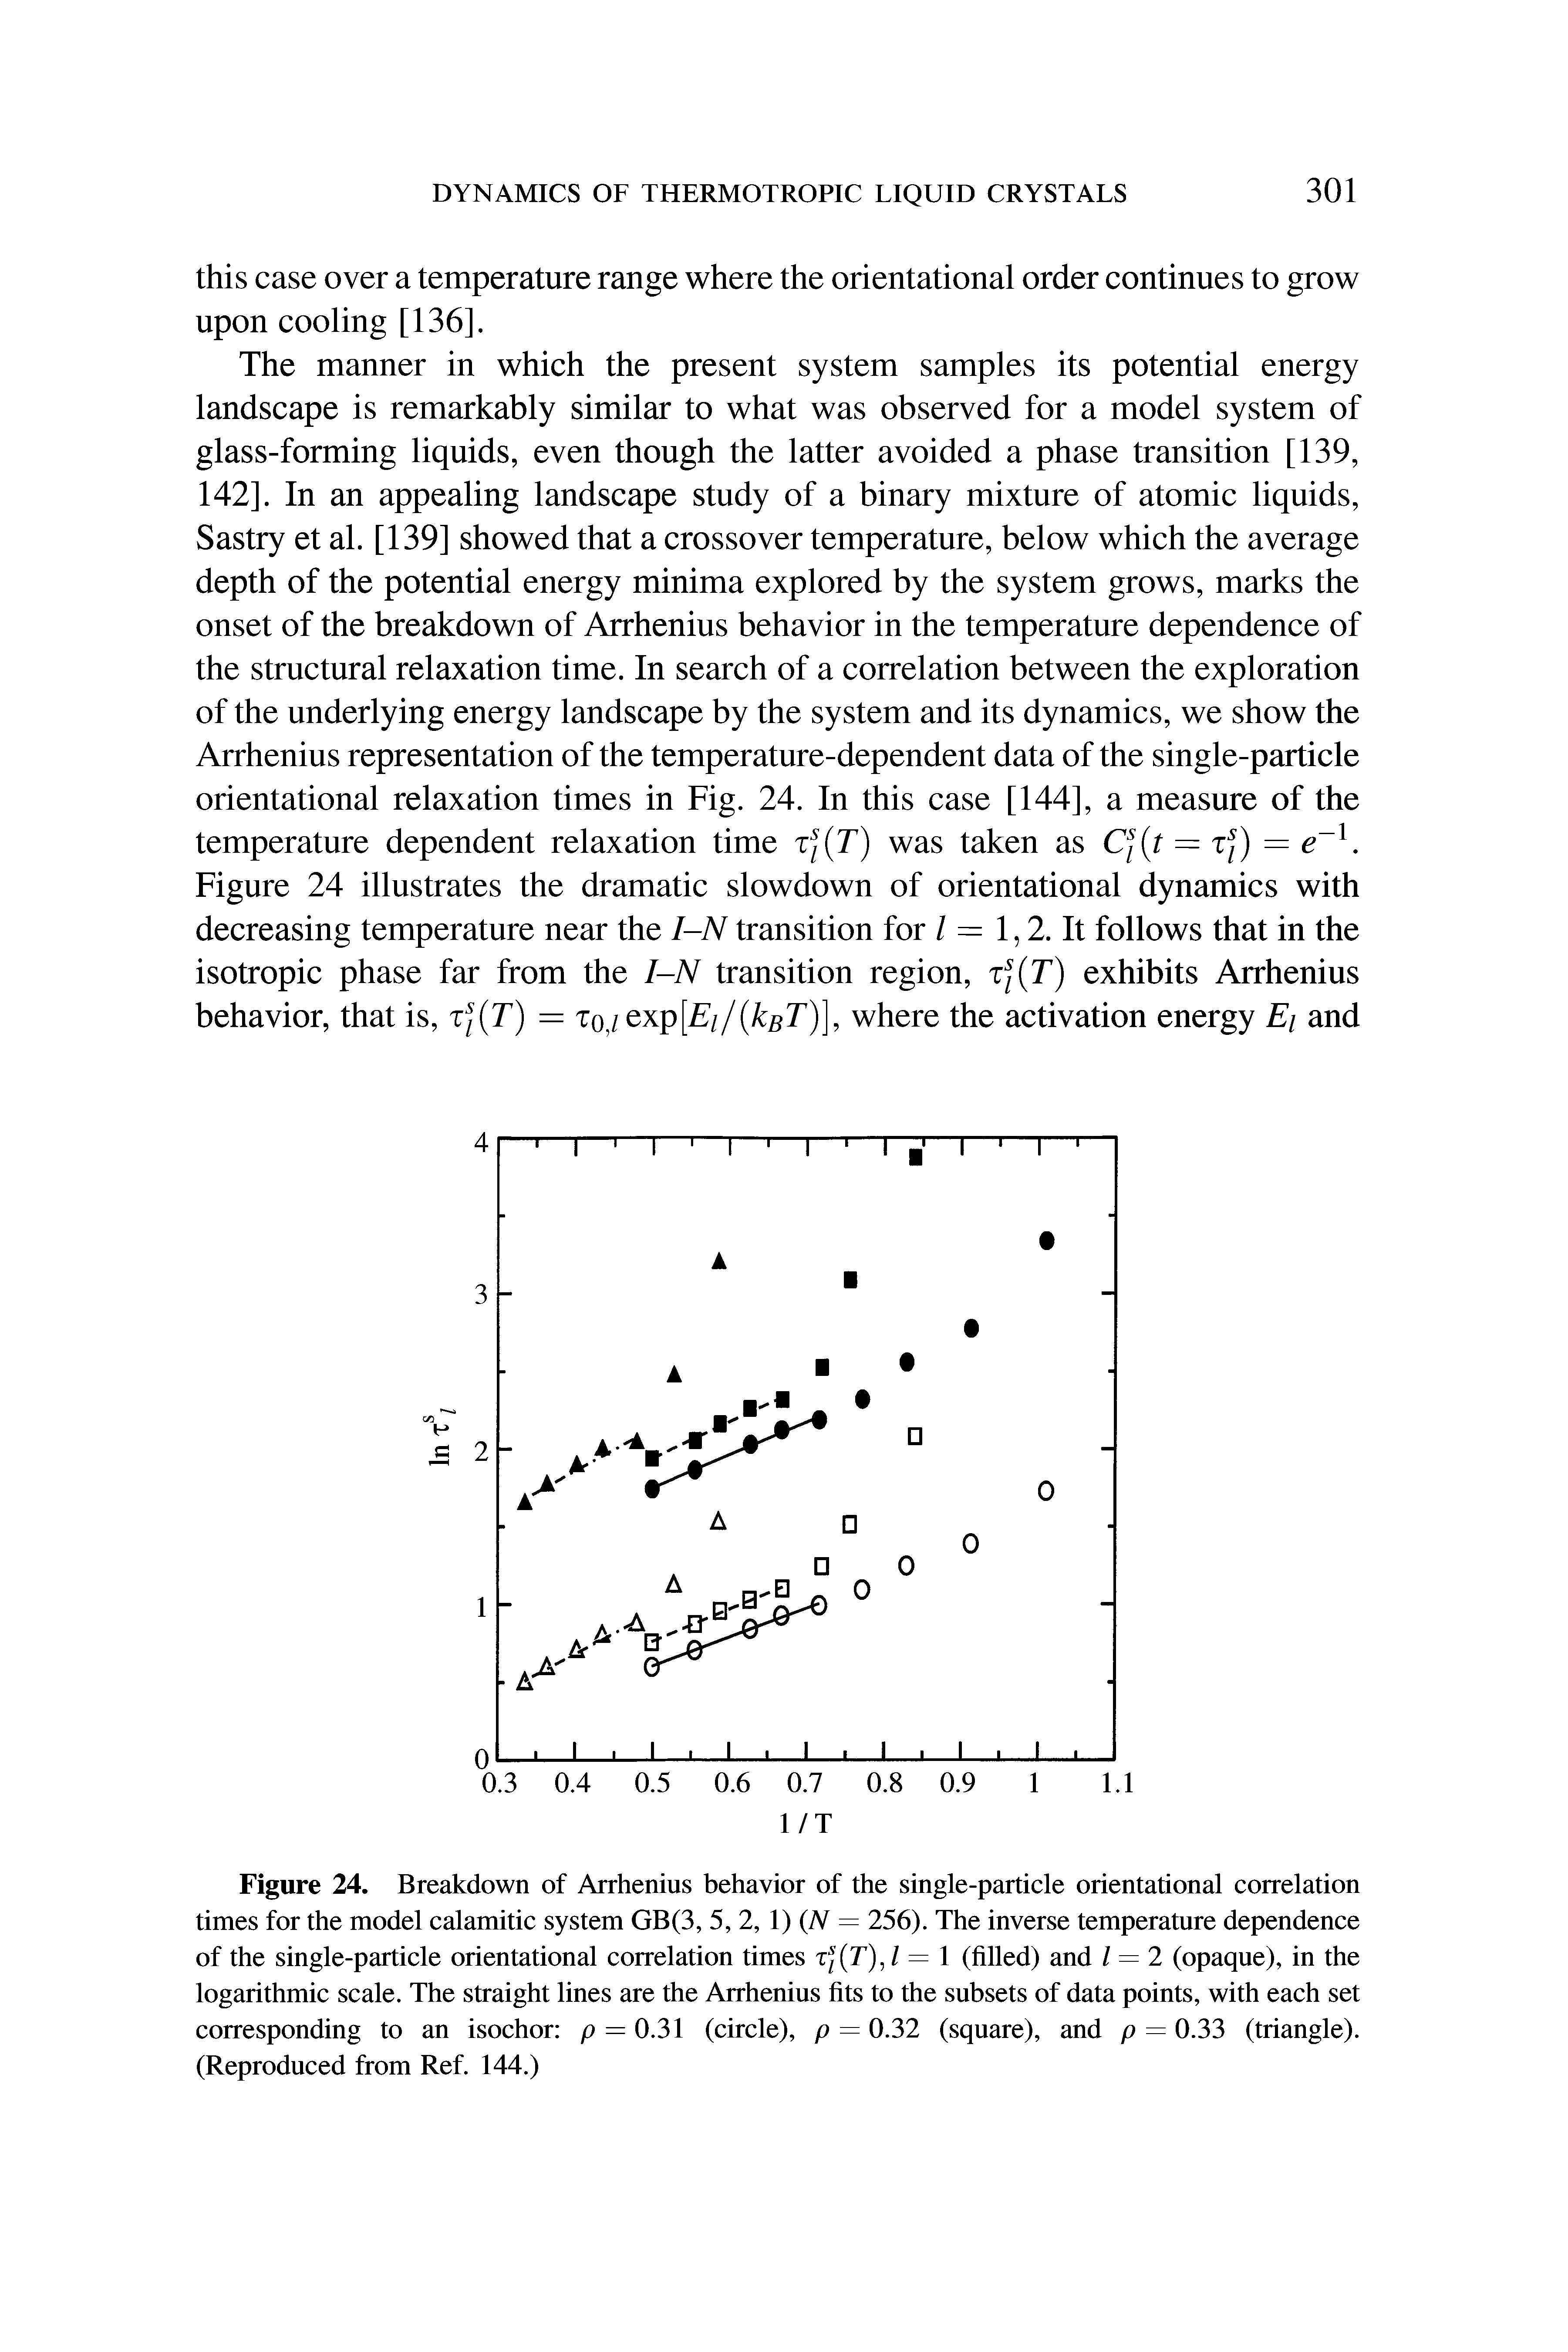 Figure 24. Breakdown of Arrhenius behavior of the single-particle orientational correlation times for the model calamitic system GB(3, 5, 2, 1) (N = 256). The inverse temperature dependence of the single-particle orientational correlation times ij(r), / = 1 (filled) and / = 2 (opaque), in the logarithmic scale. The straight lines are the Arrhenius fits to the subsets of data points, with each set corresponding to an isochor p = 0.31 (circle), p = 0.32 (square), and p = 0.33 (triangle). (Reproduced from Ref. 144.)...